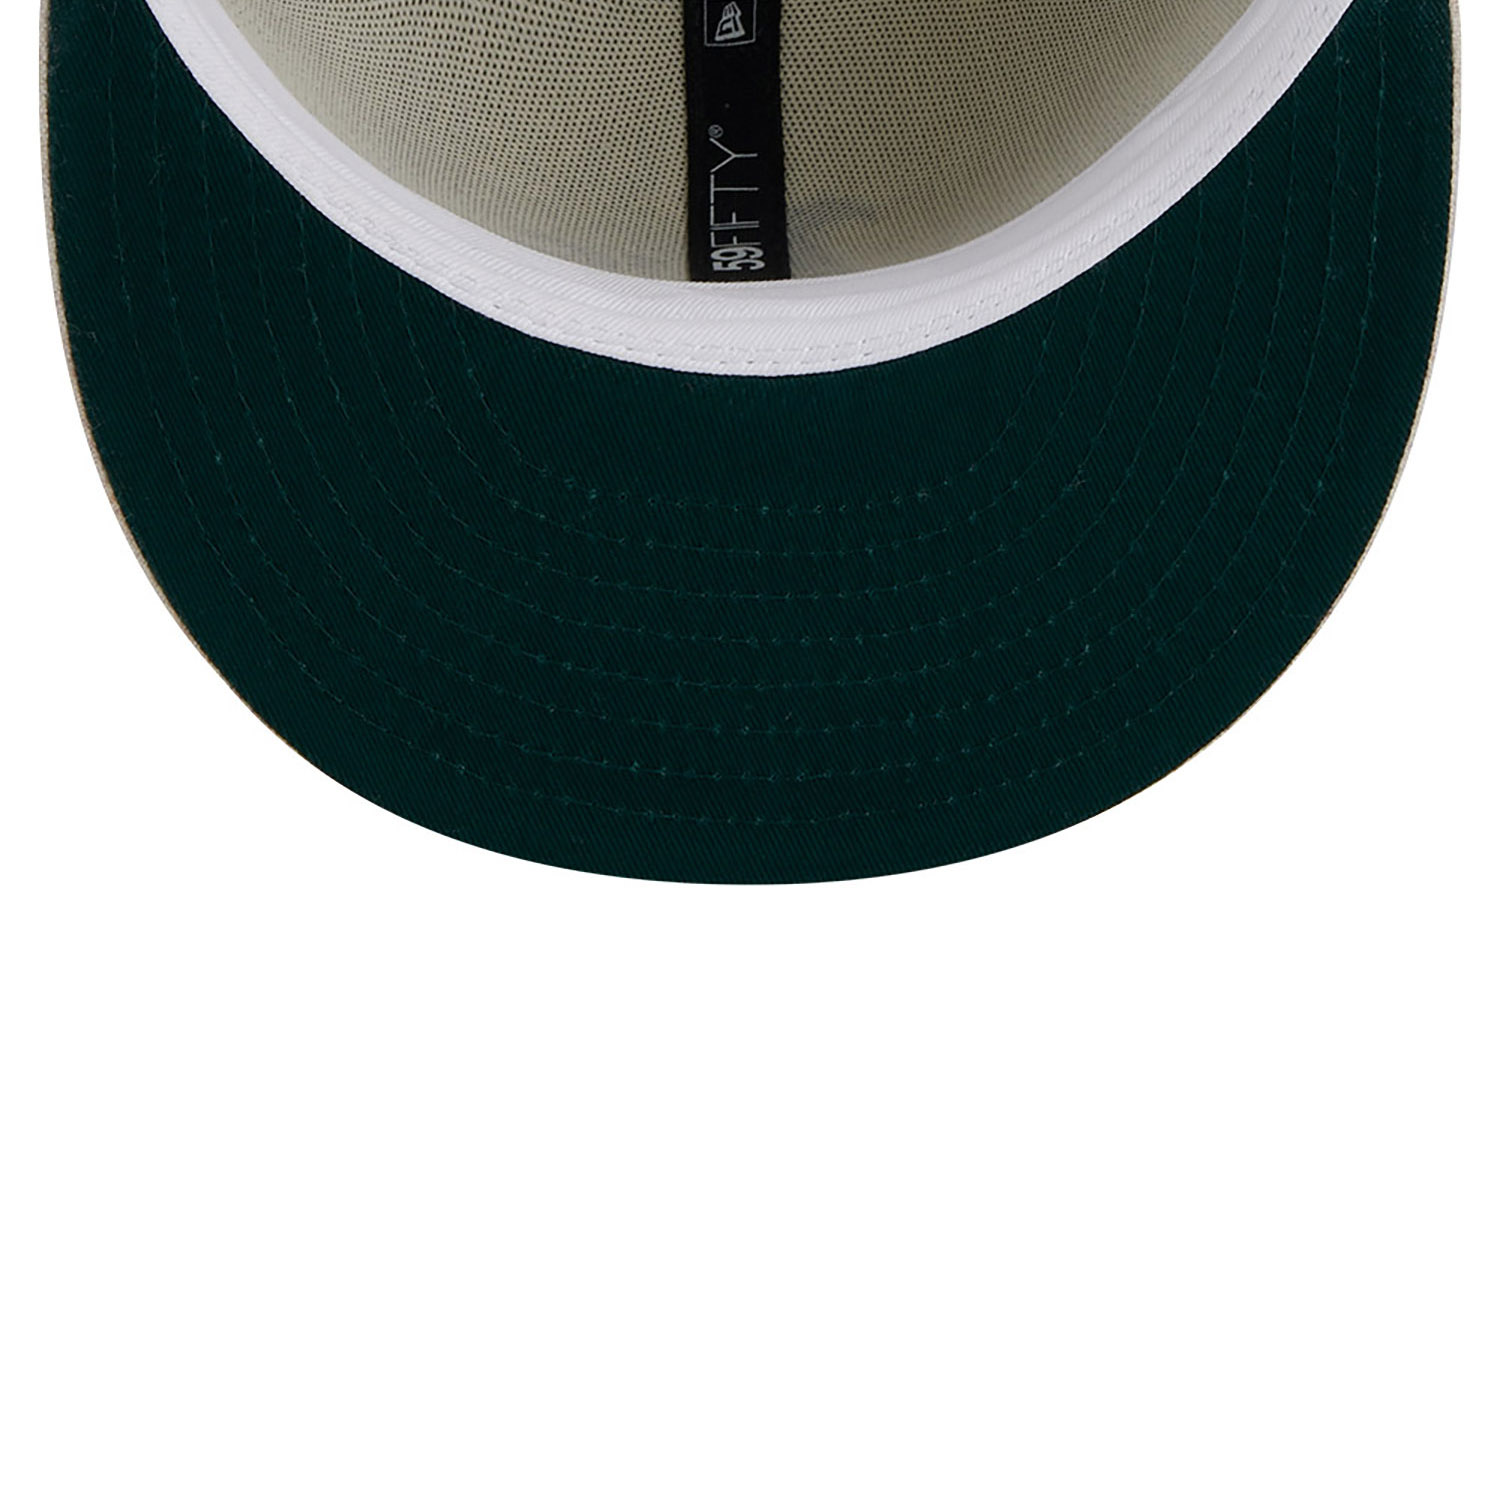 Oakland Athletics Match-Up White 59FIFTY Fitted Cap